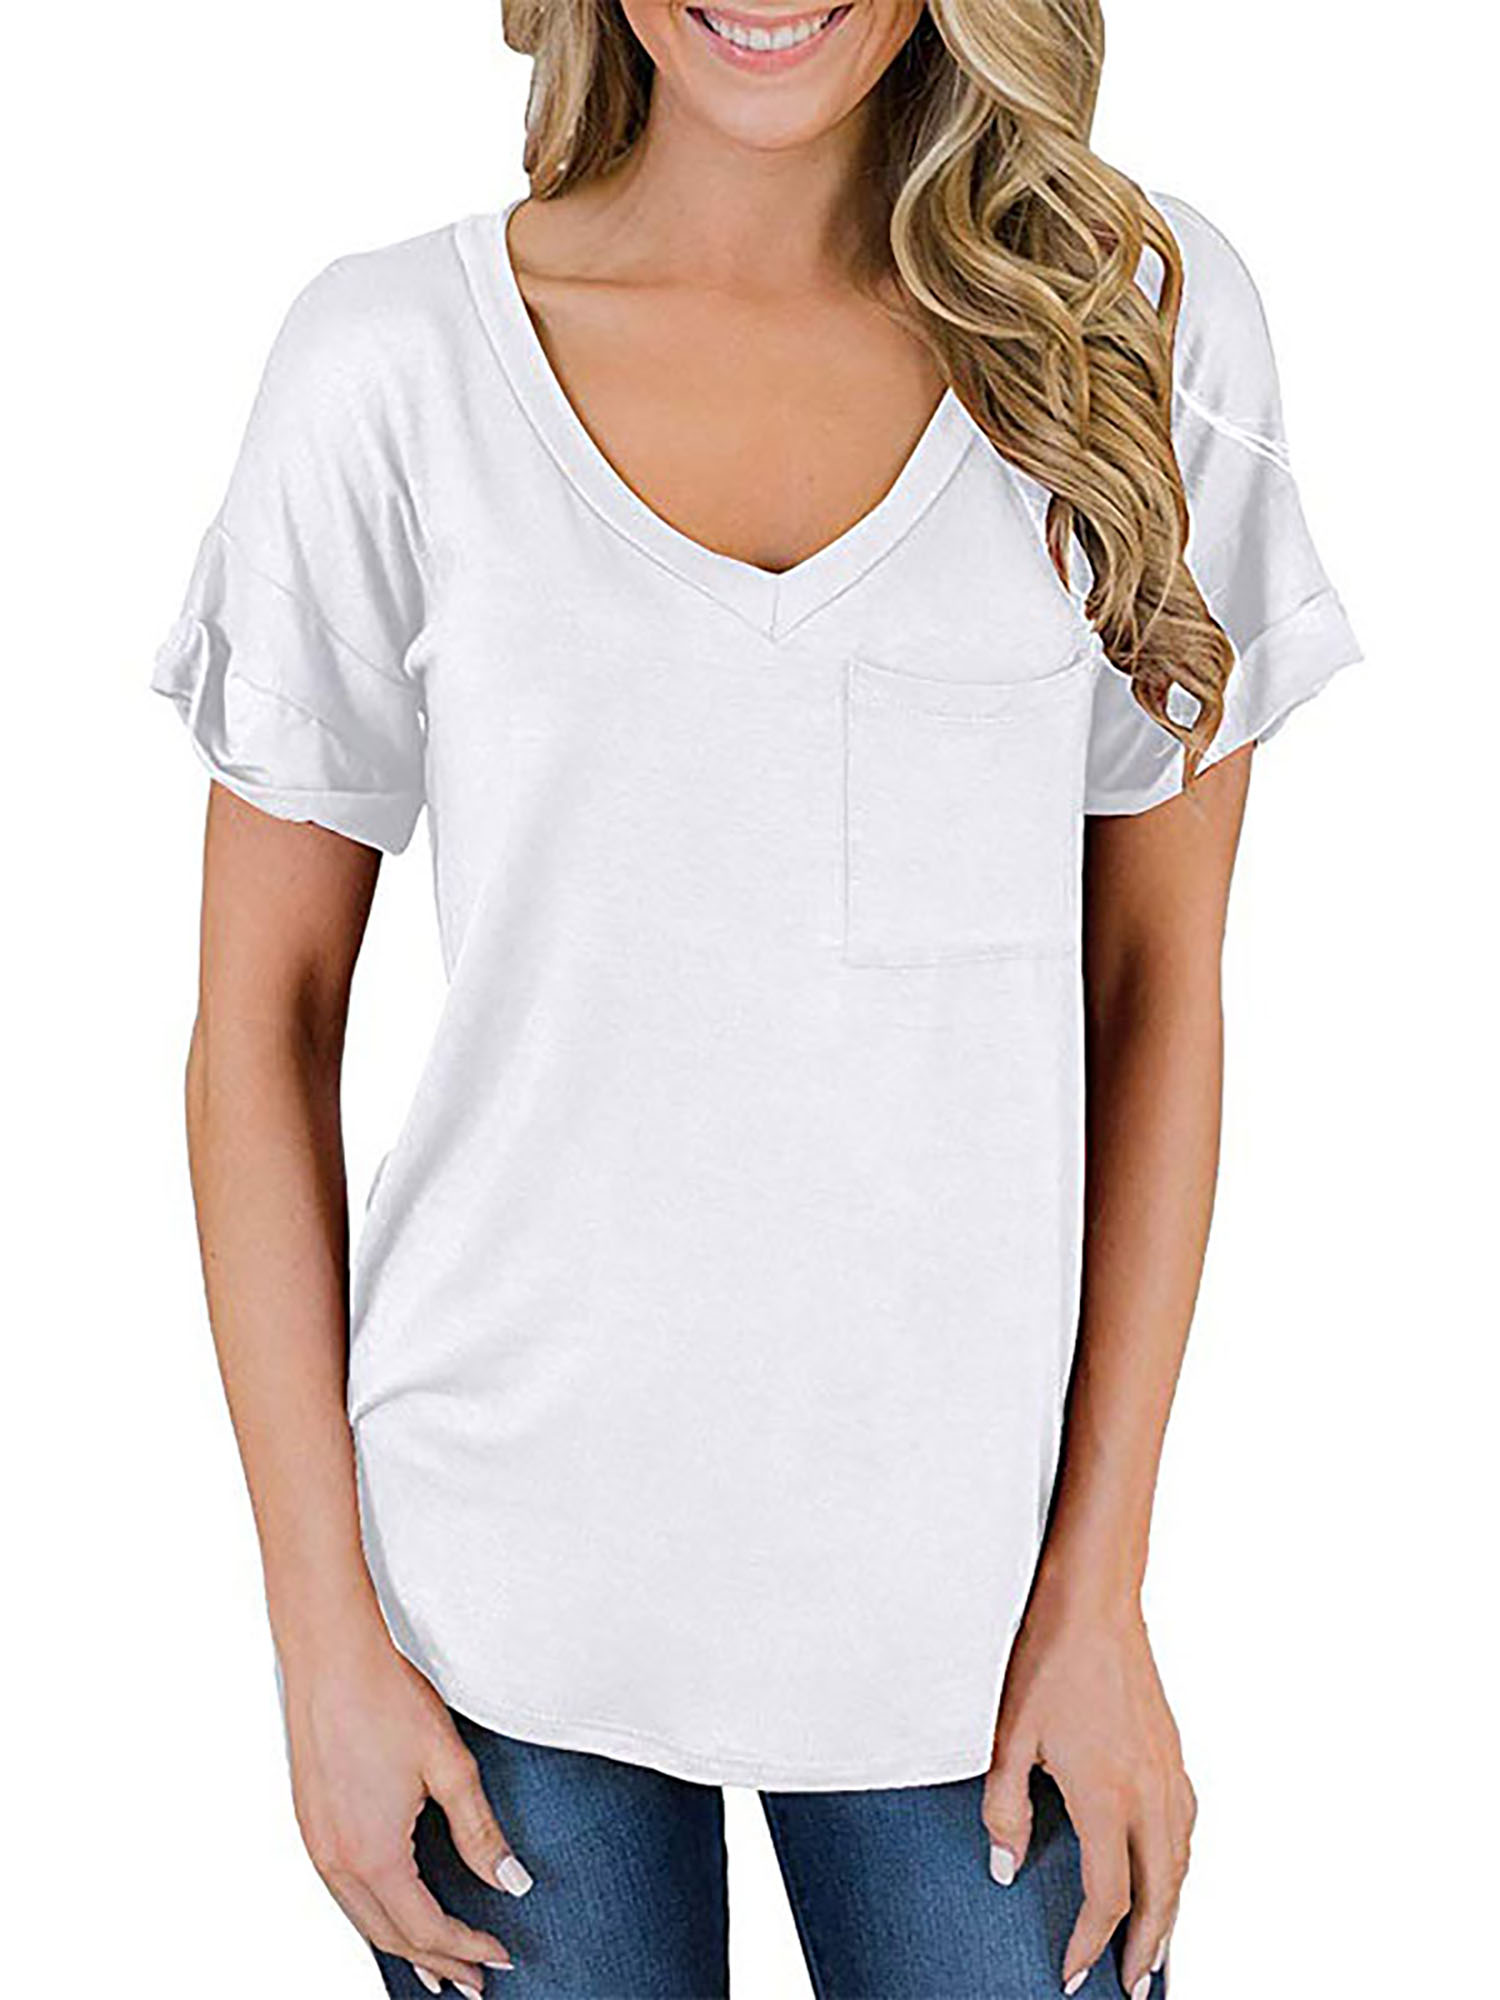 Women Solid Color Short-Sleeved Tops Blouse V-Neck Casual Pullover Tops Fashion Tunic Tops 